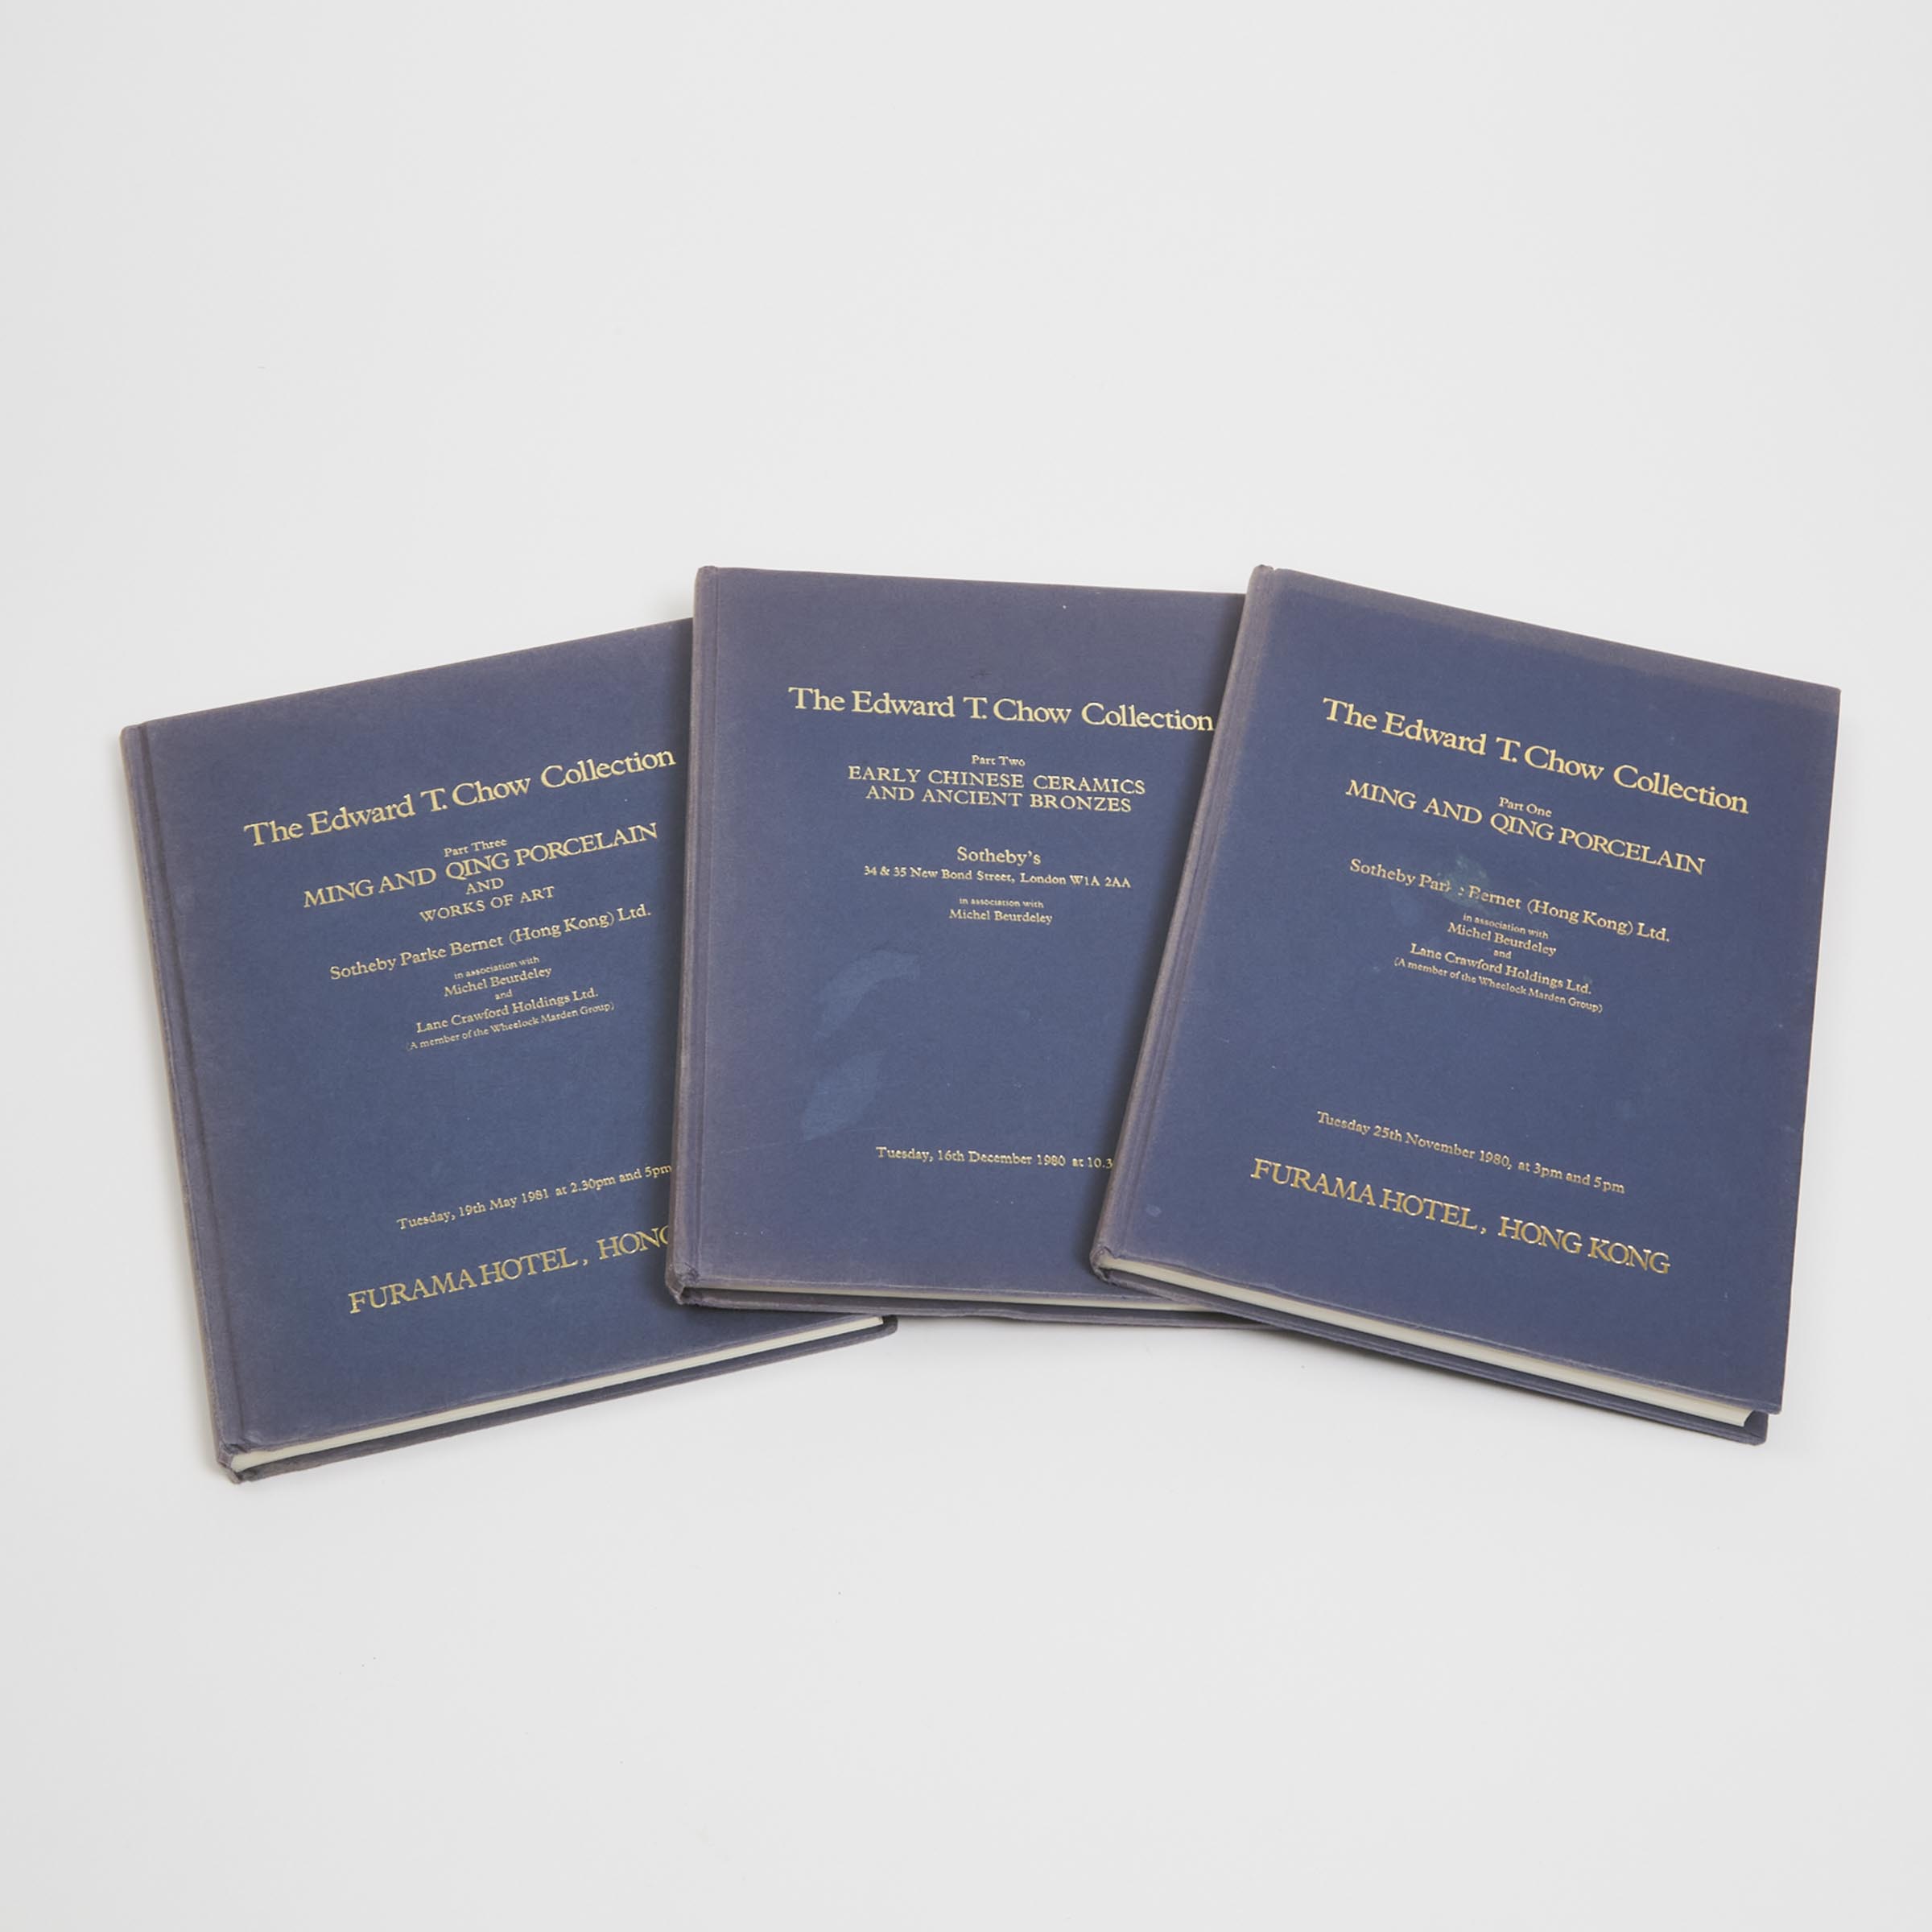 A Complete Set of Three Sotheby's Edward T. Chow Catalogues, Parts I-III, 1980-1981